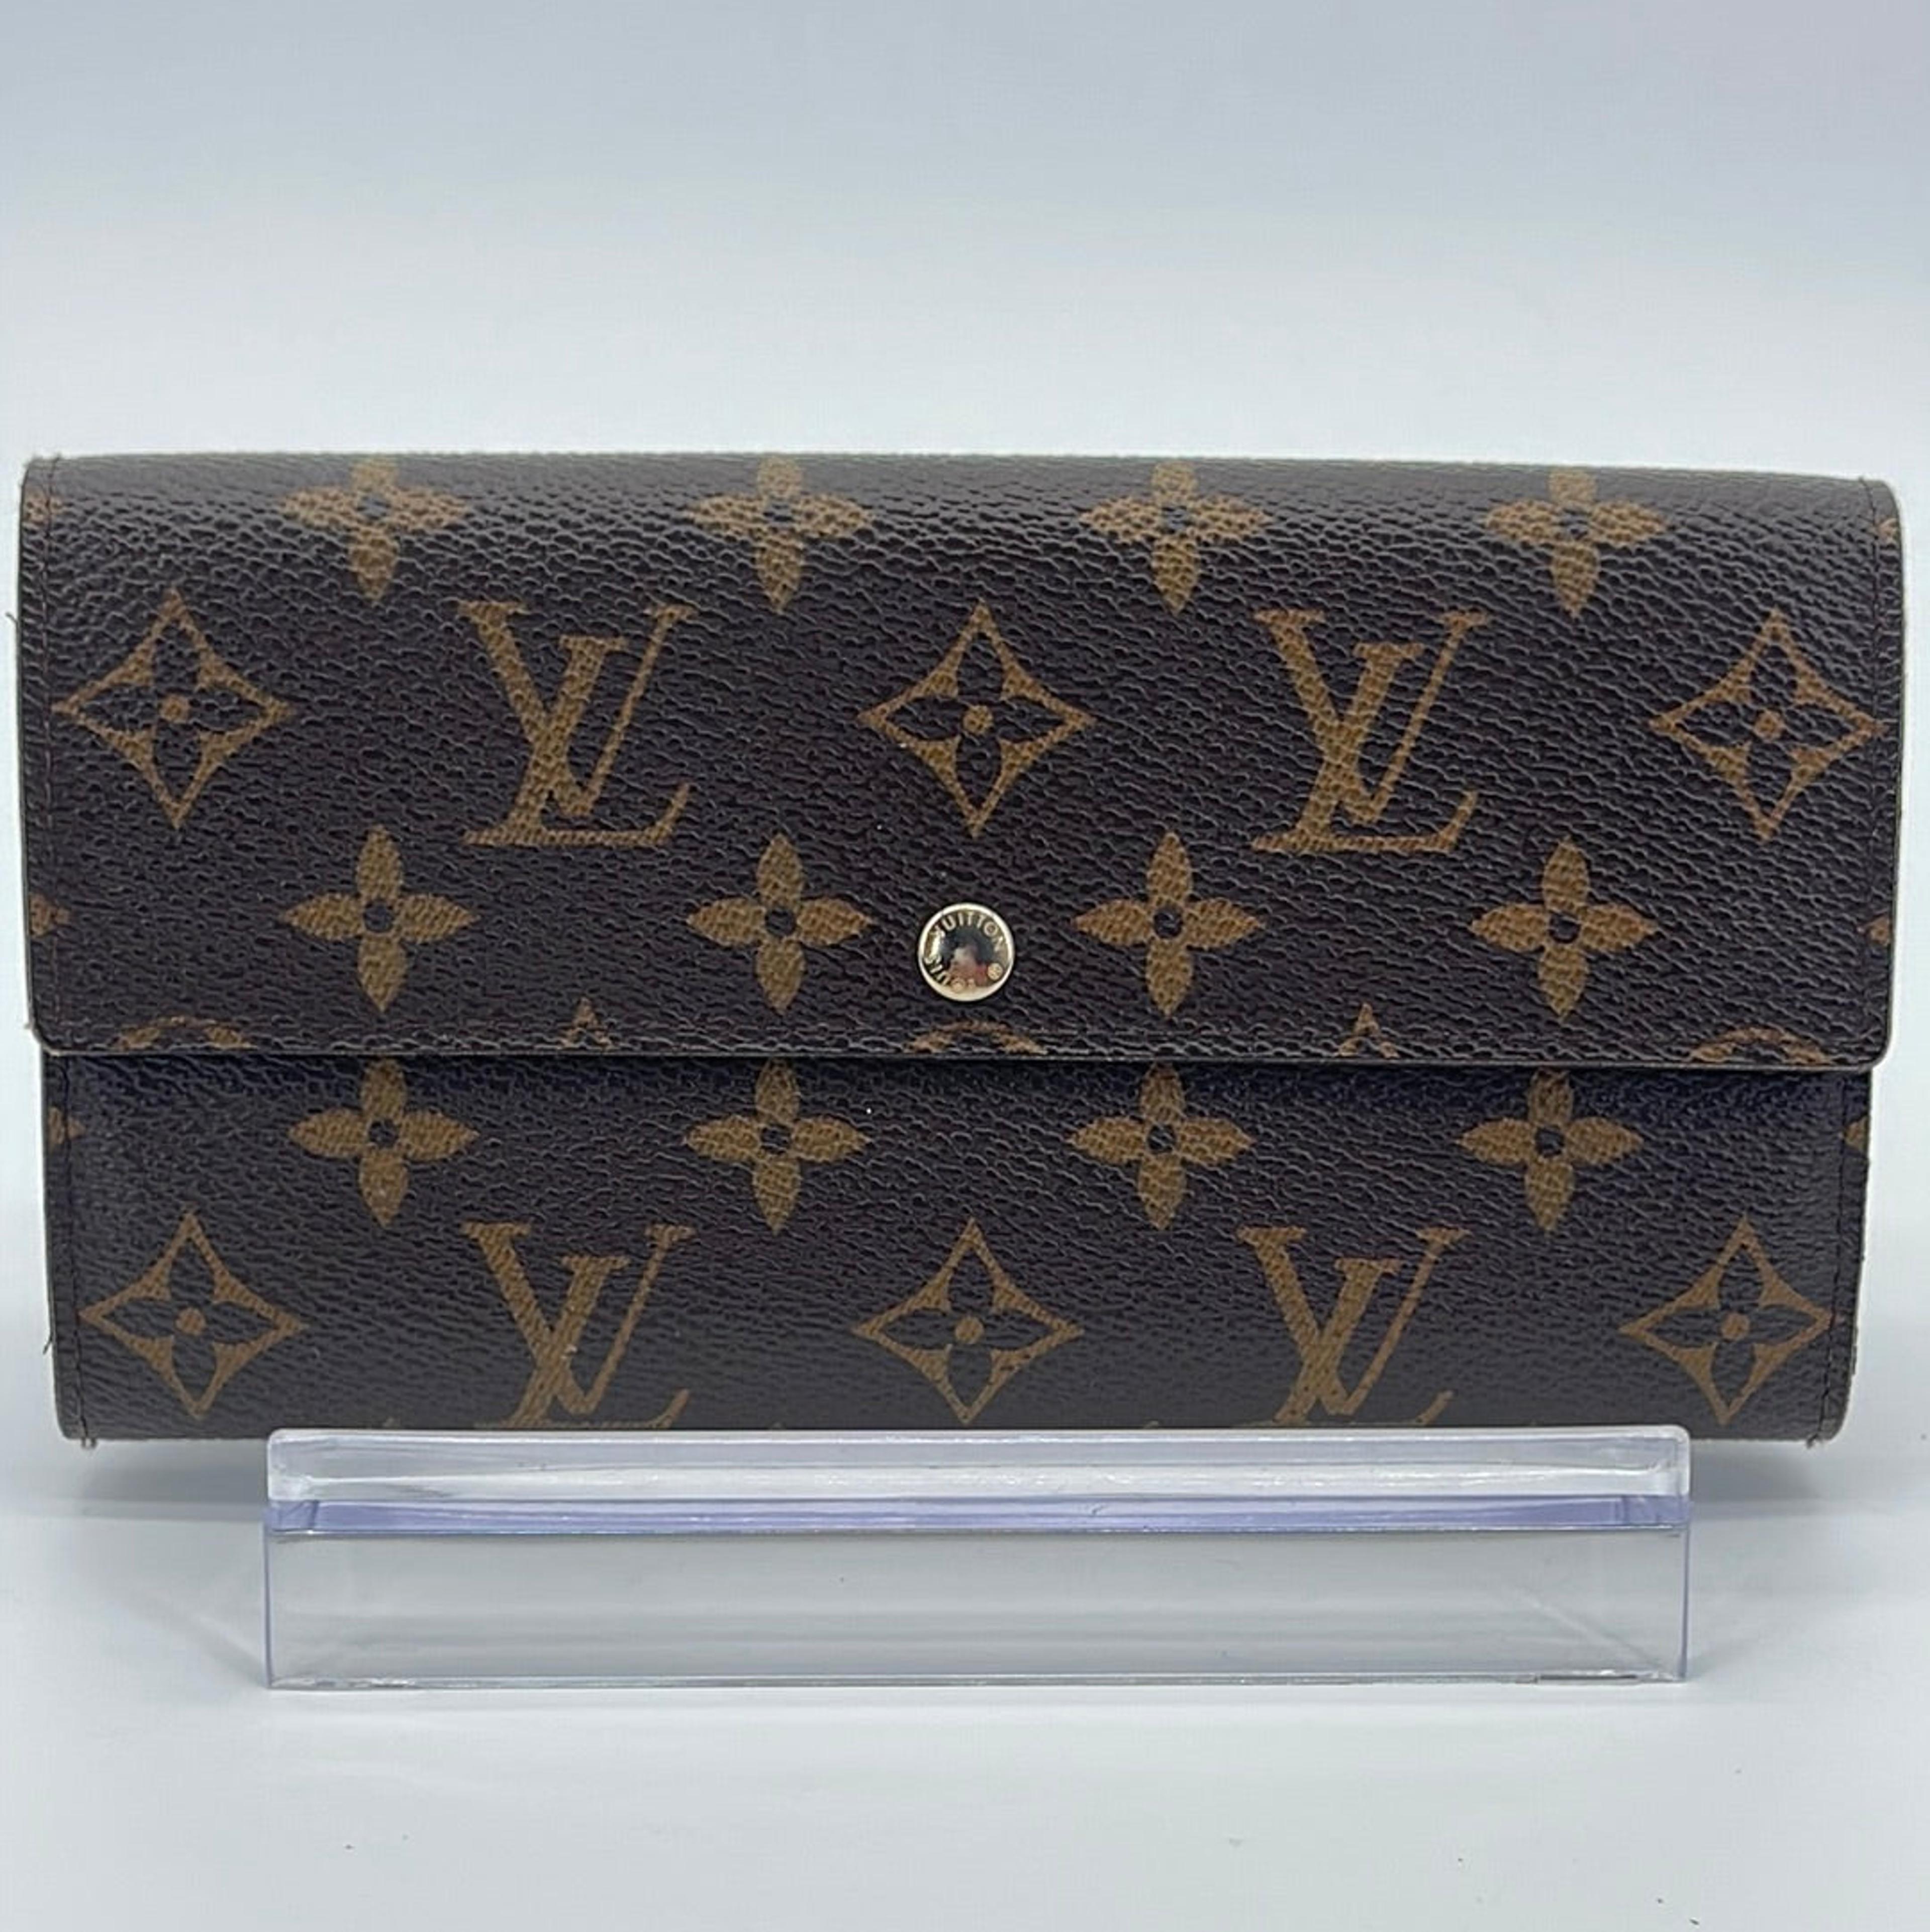 Authentic Louis Vuitton Leather Sarah Wallet in Great Preloved 